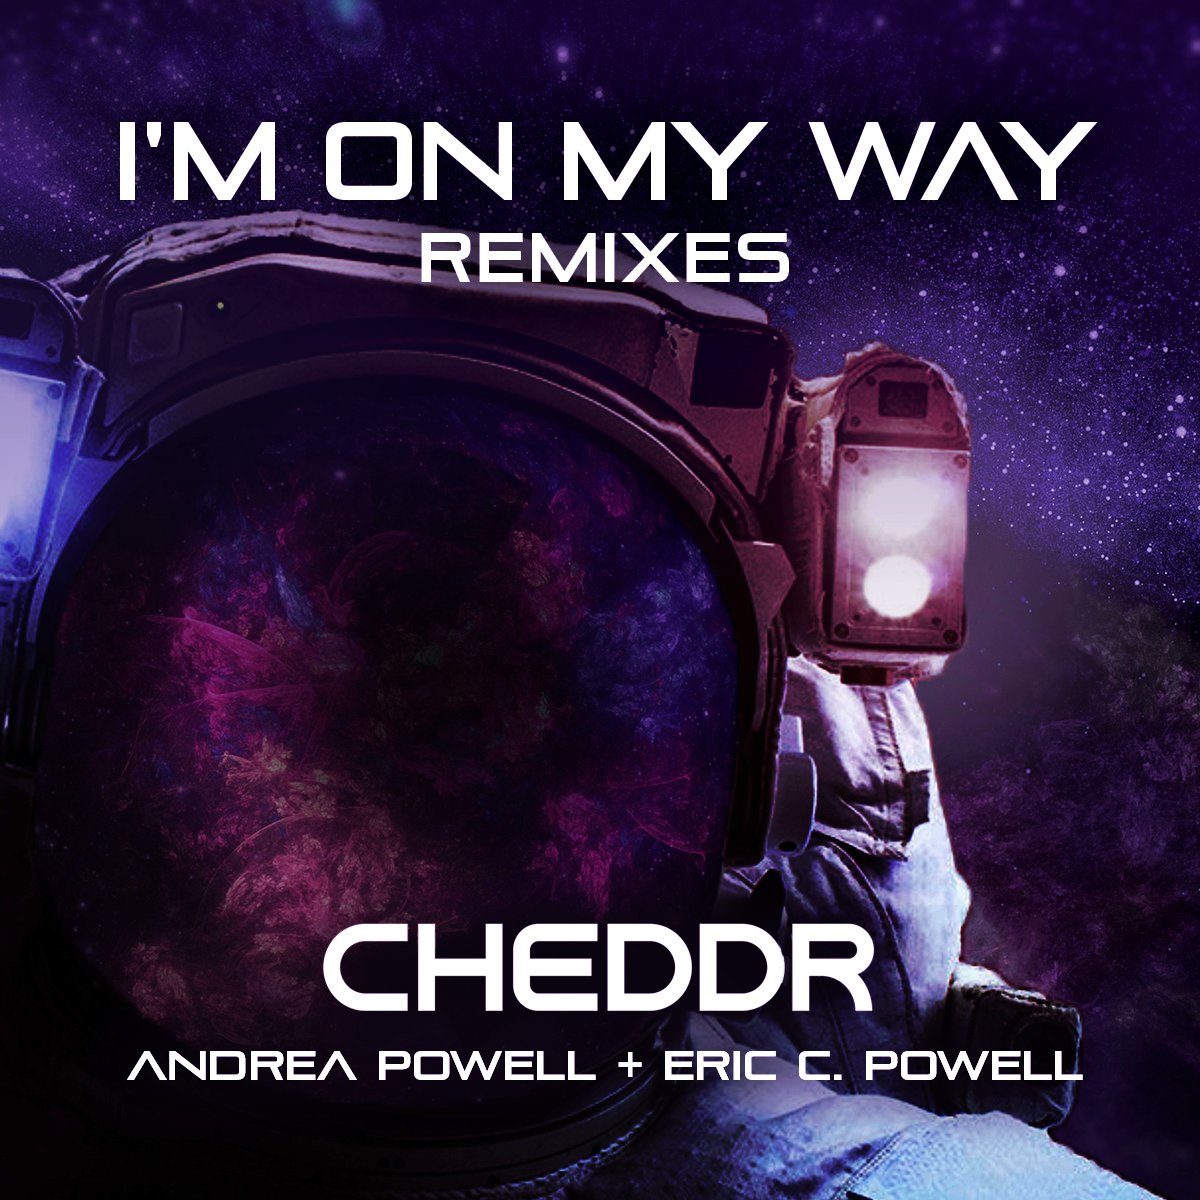 Thank you to @modsnapradio for playing our @CheddrMusic collab I'M ON MY WAY ft @PurpleRoseAndy. Links at linktr.ee/ecpmusic